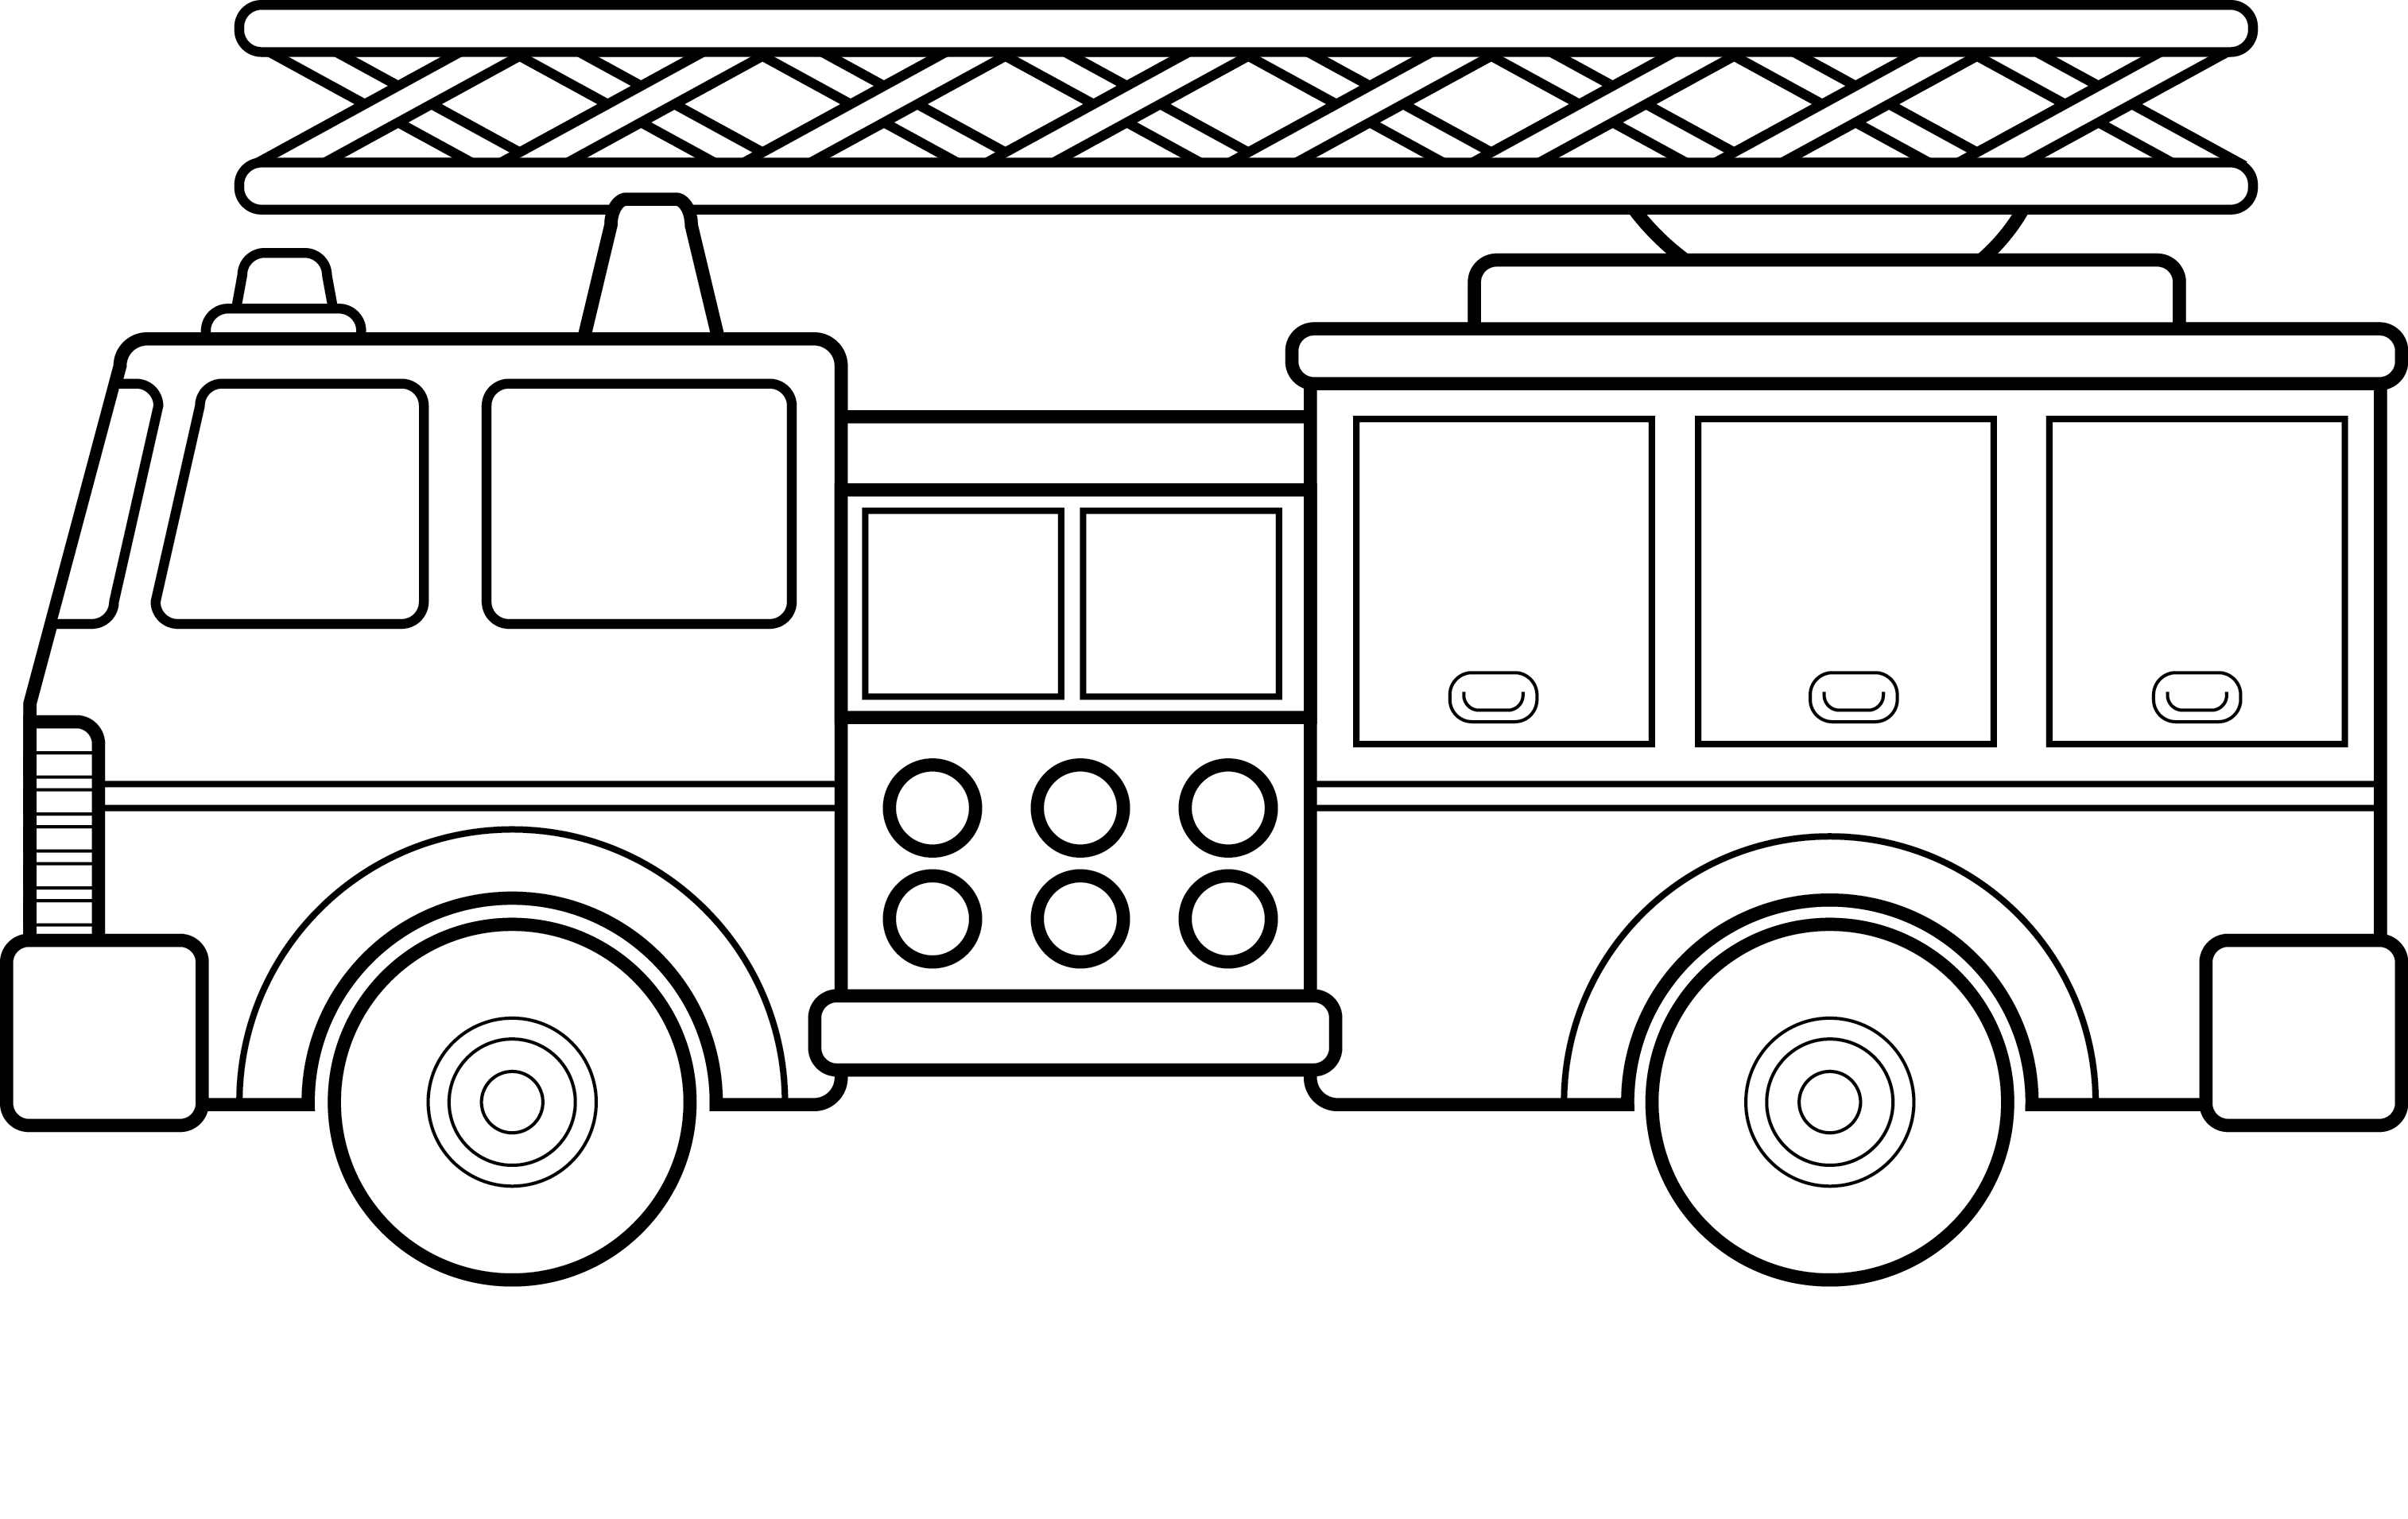  Truck coloring pages | color printing | coloring sheets | #38